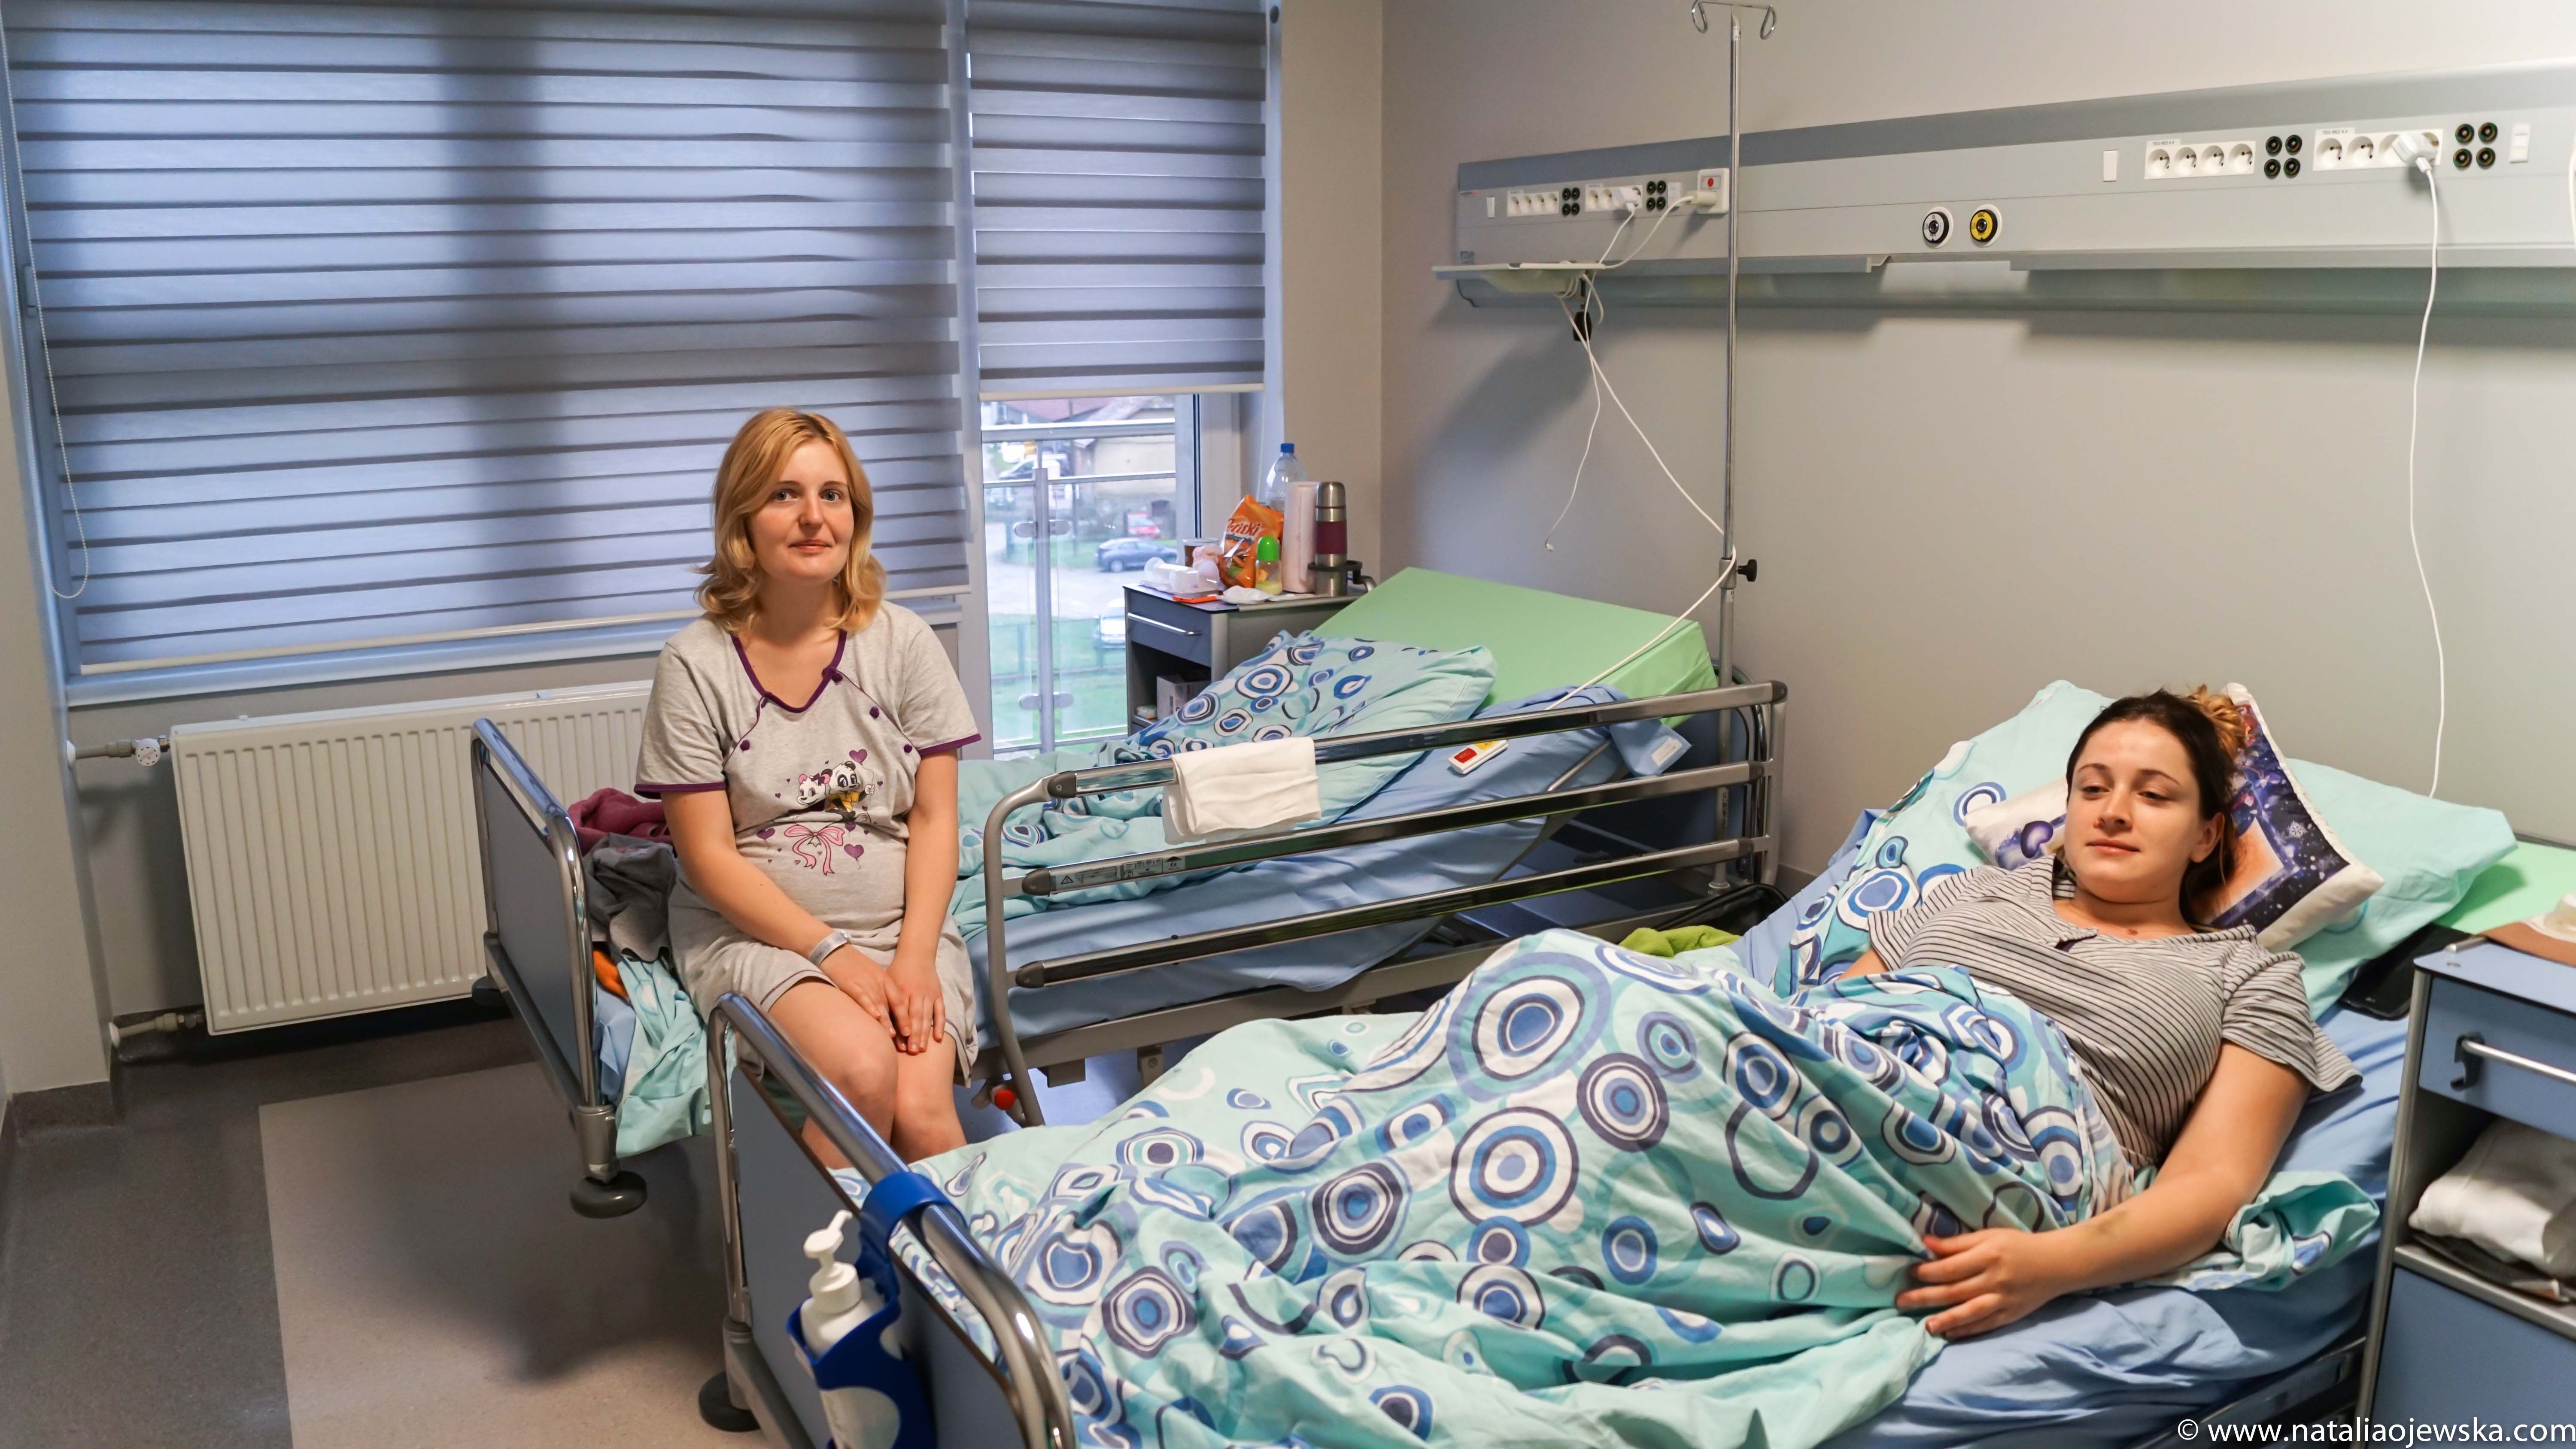 Paulina Slifierz (left) and Maja Suder (right) recover after childbirth at the Independent Public Health Care Center in Myślenice, Poland. Image by Natalia Ojewska for The Texas Tribune. Poland, 2018. 